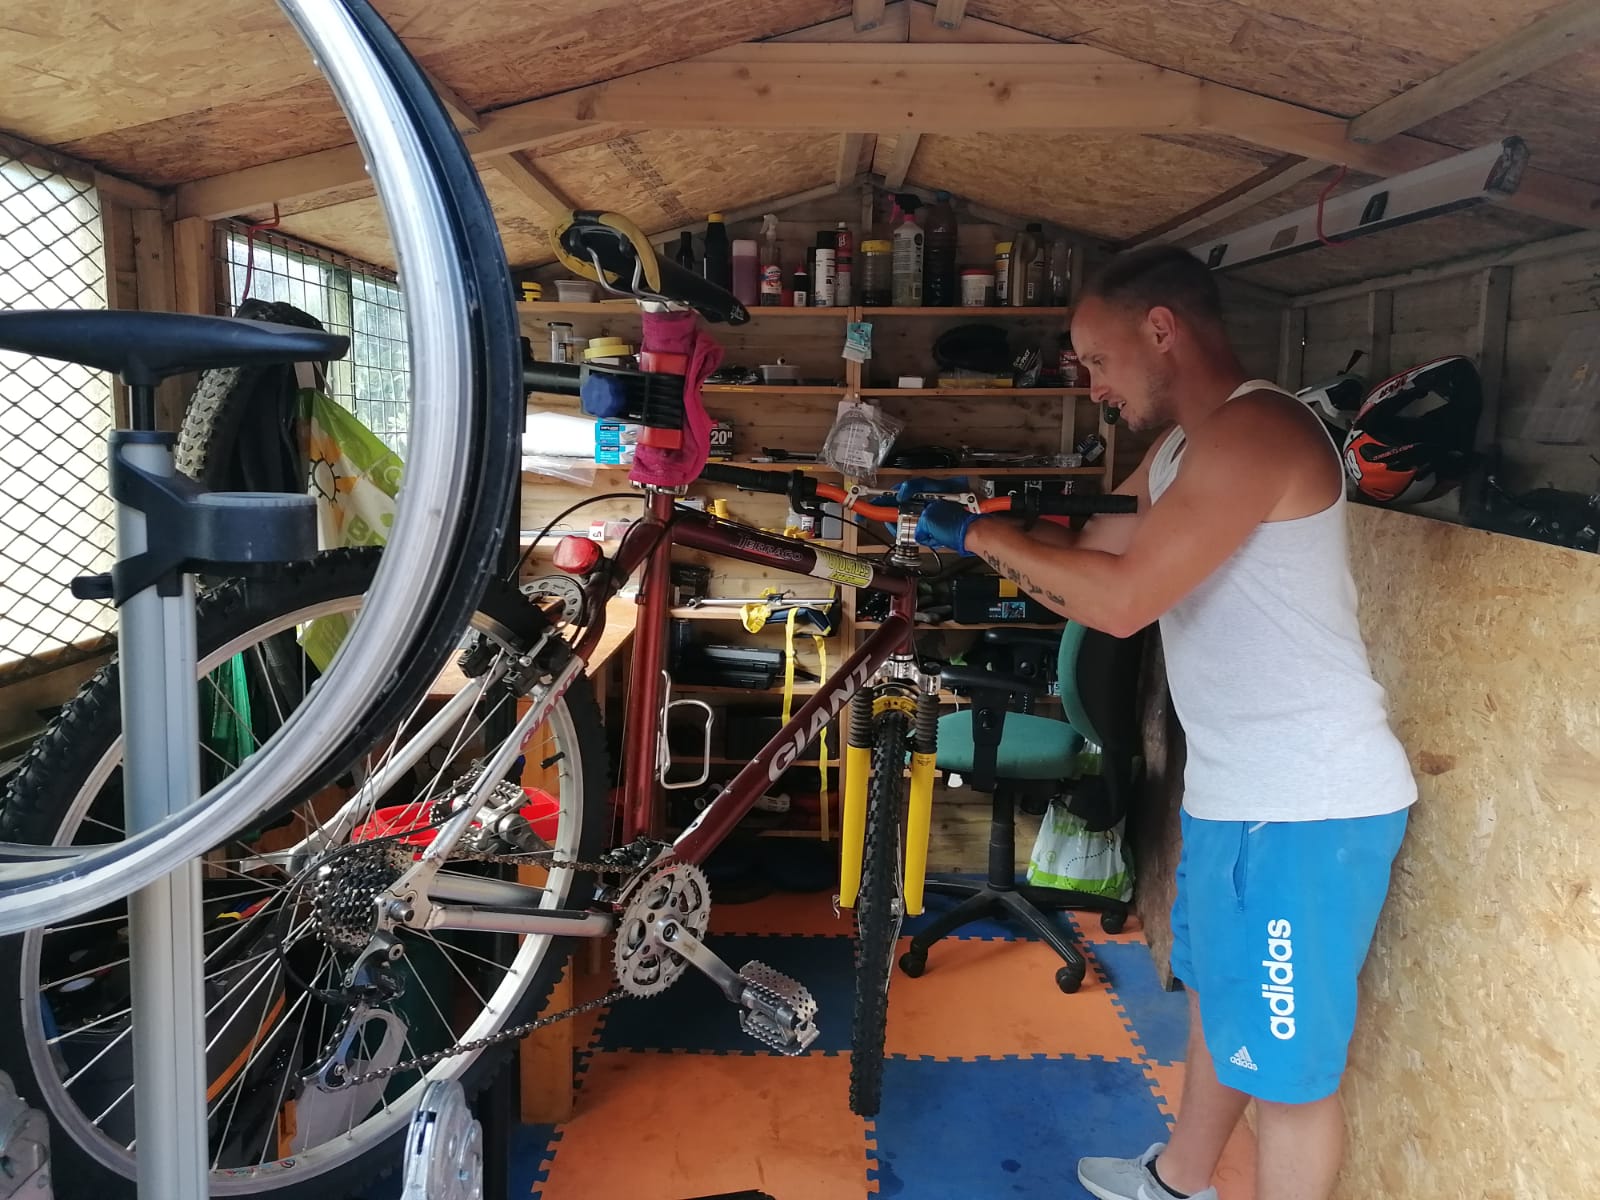 Nathan Shephard fixing a bike in his shed